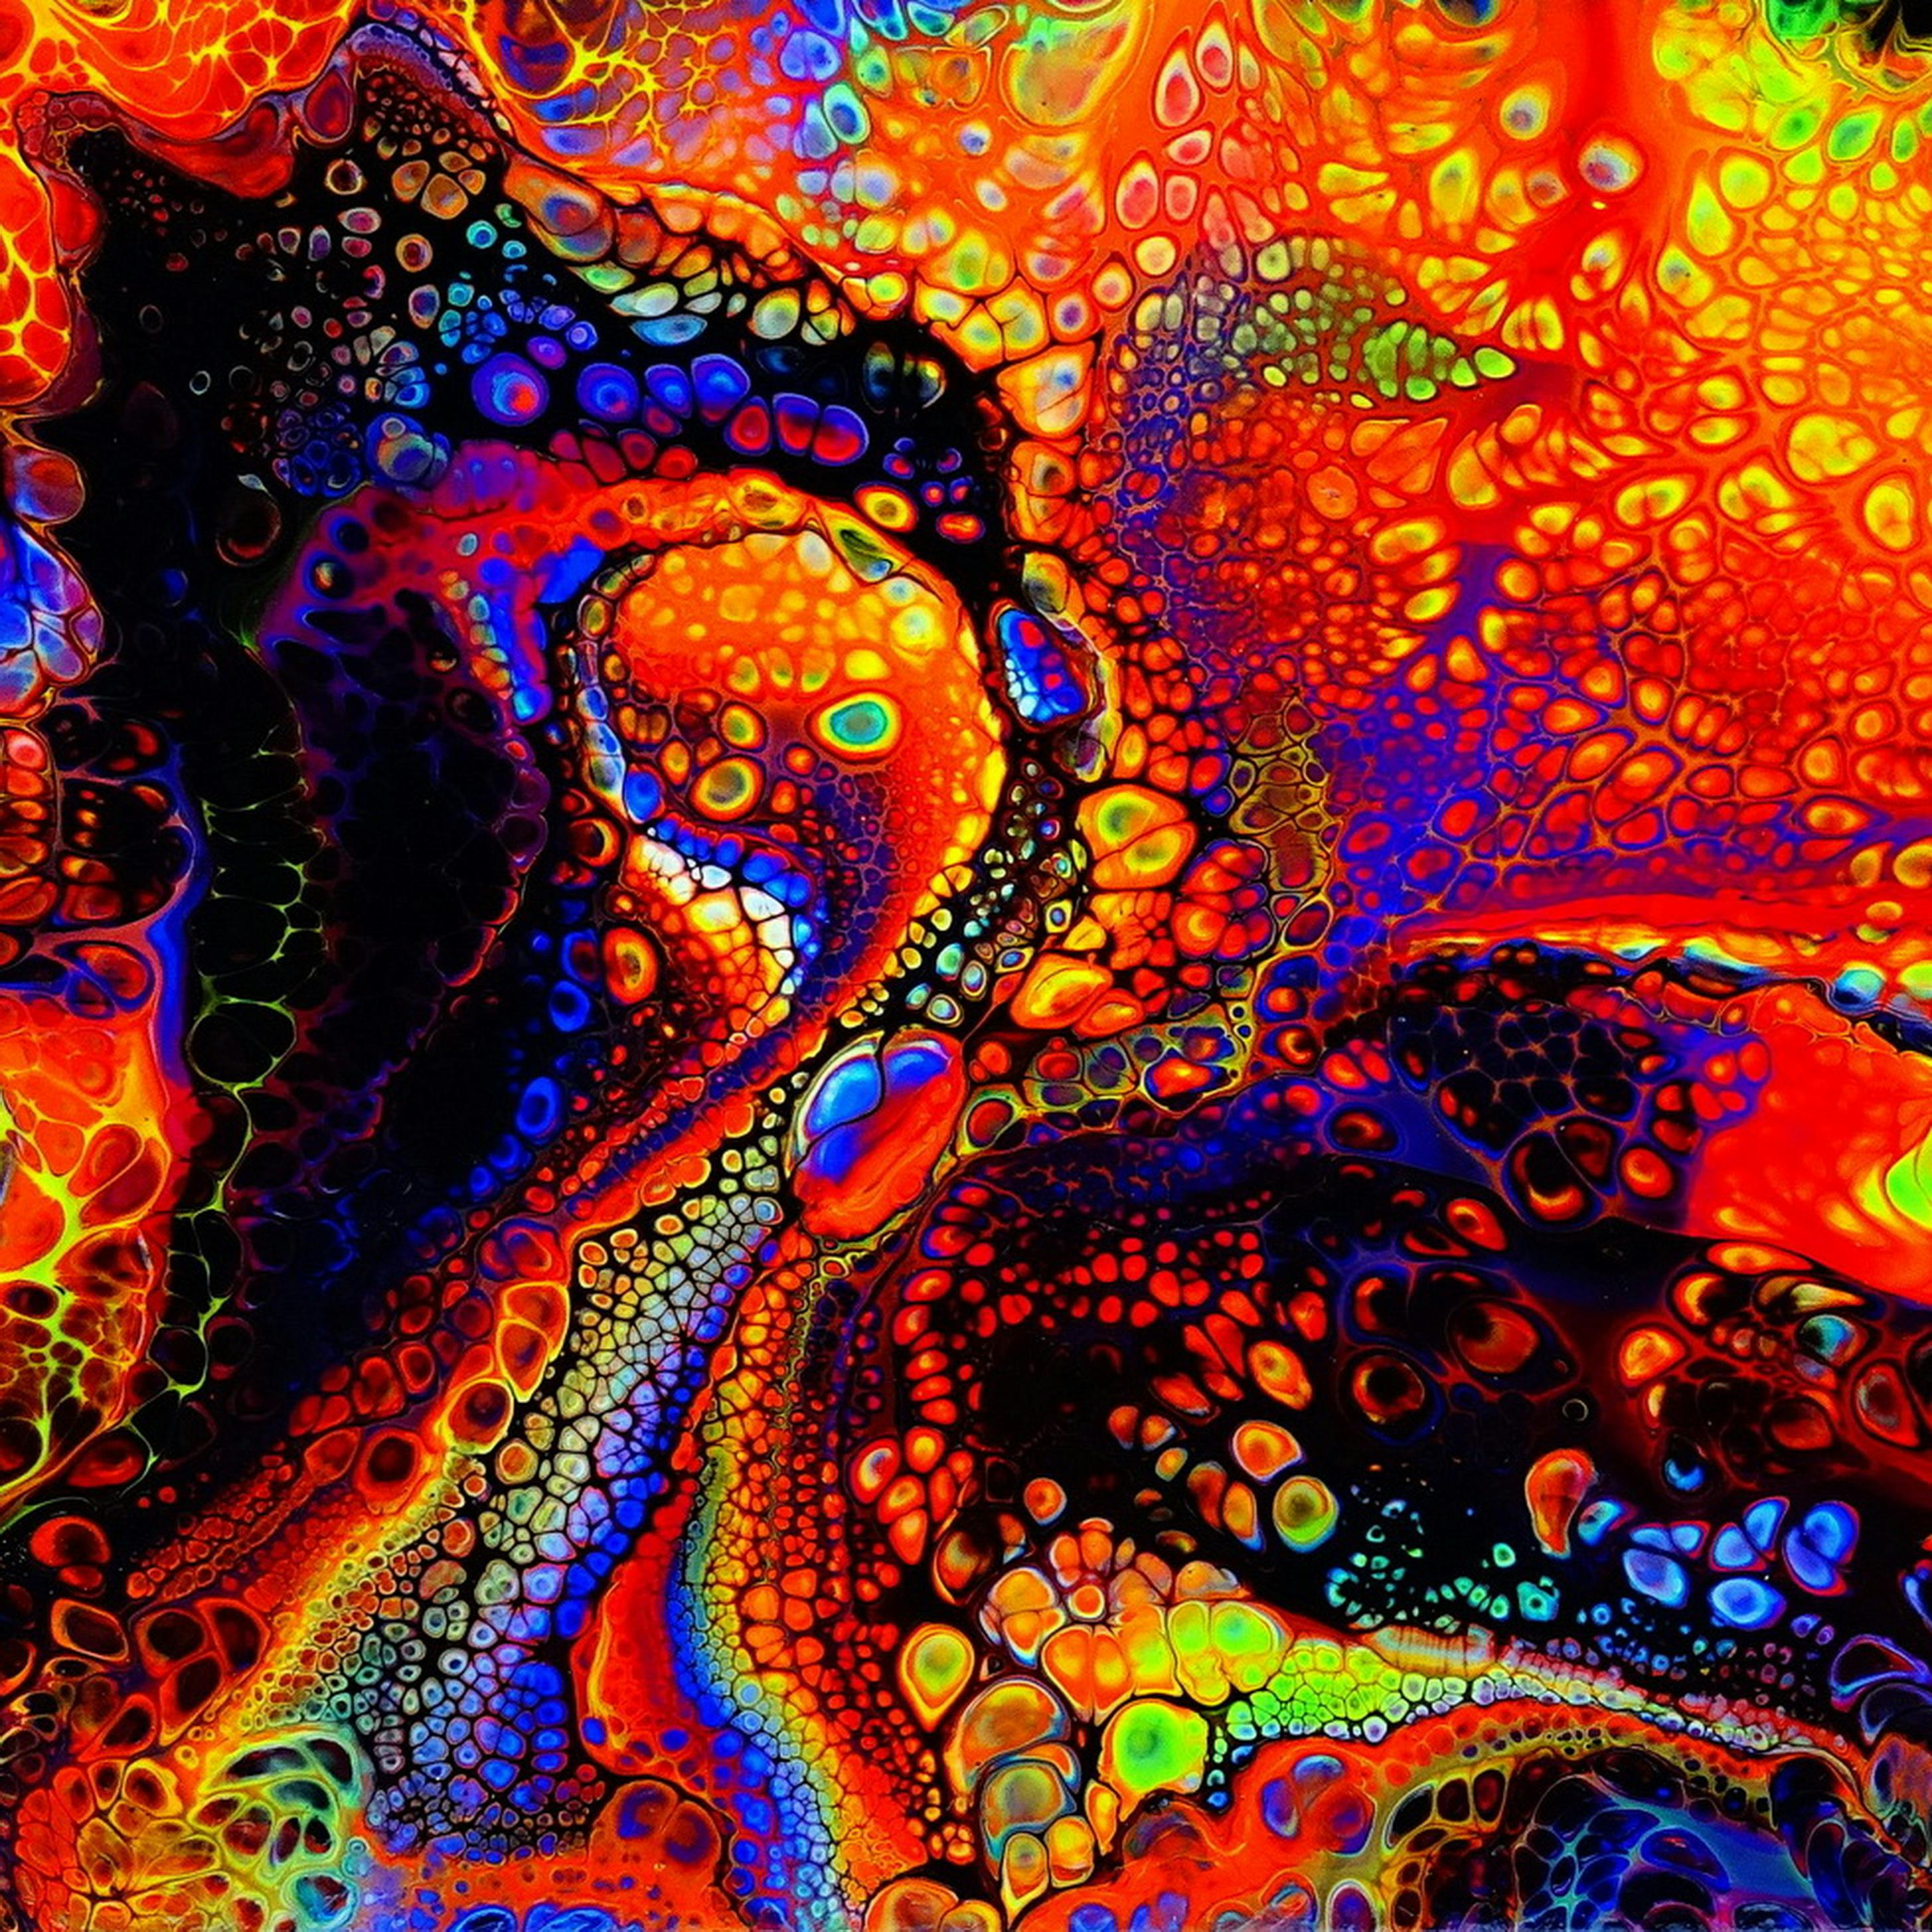 460 Artistic Psychedelic HD Wallpapers and Backgrounds